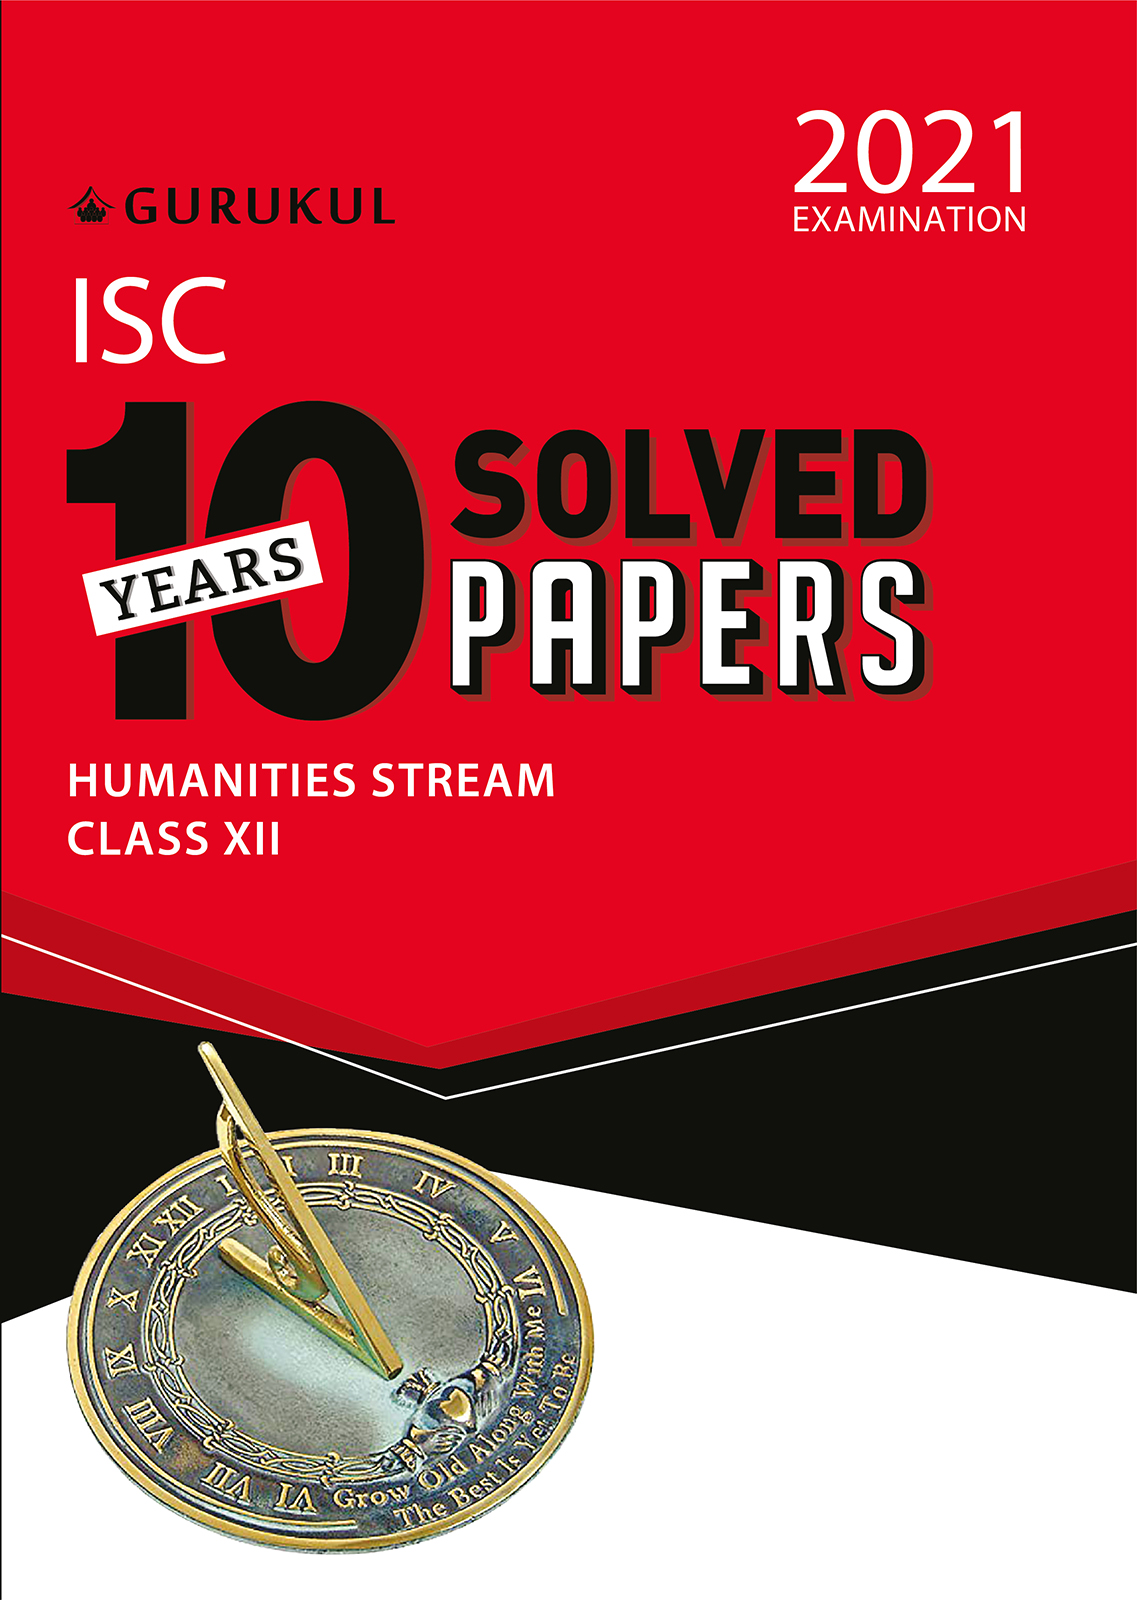 10 Years Solved Papers  Humanities ISC Class 12 for 2021 Examination